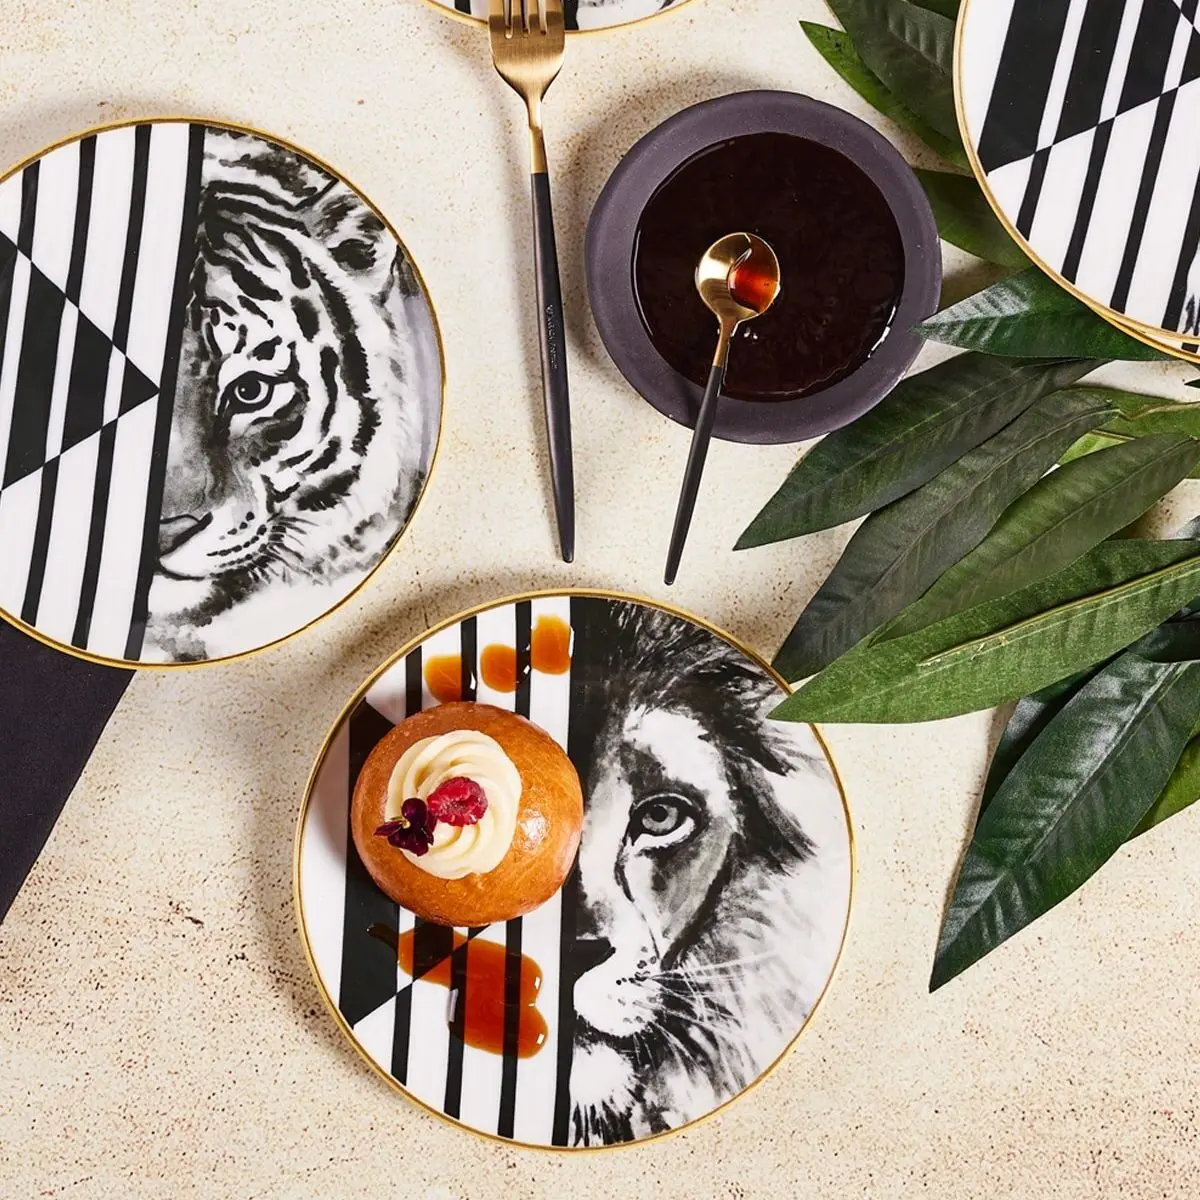 

6 Person Cake Dessert Plate 21 Cm Design Modern Serving Plates Porcelain Material Stylish Tiger Patterned Gift Products For Home